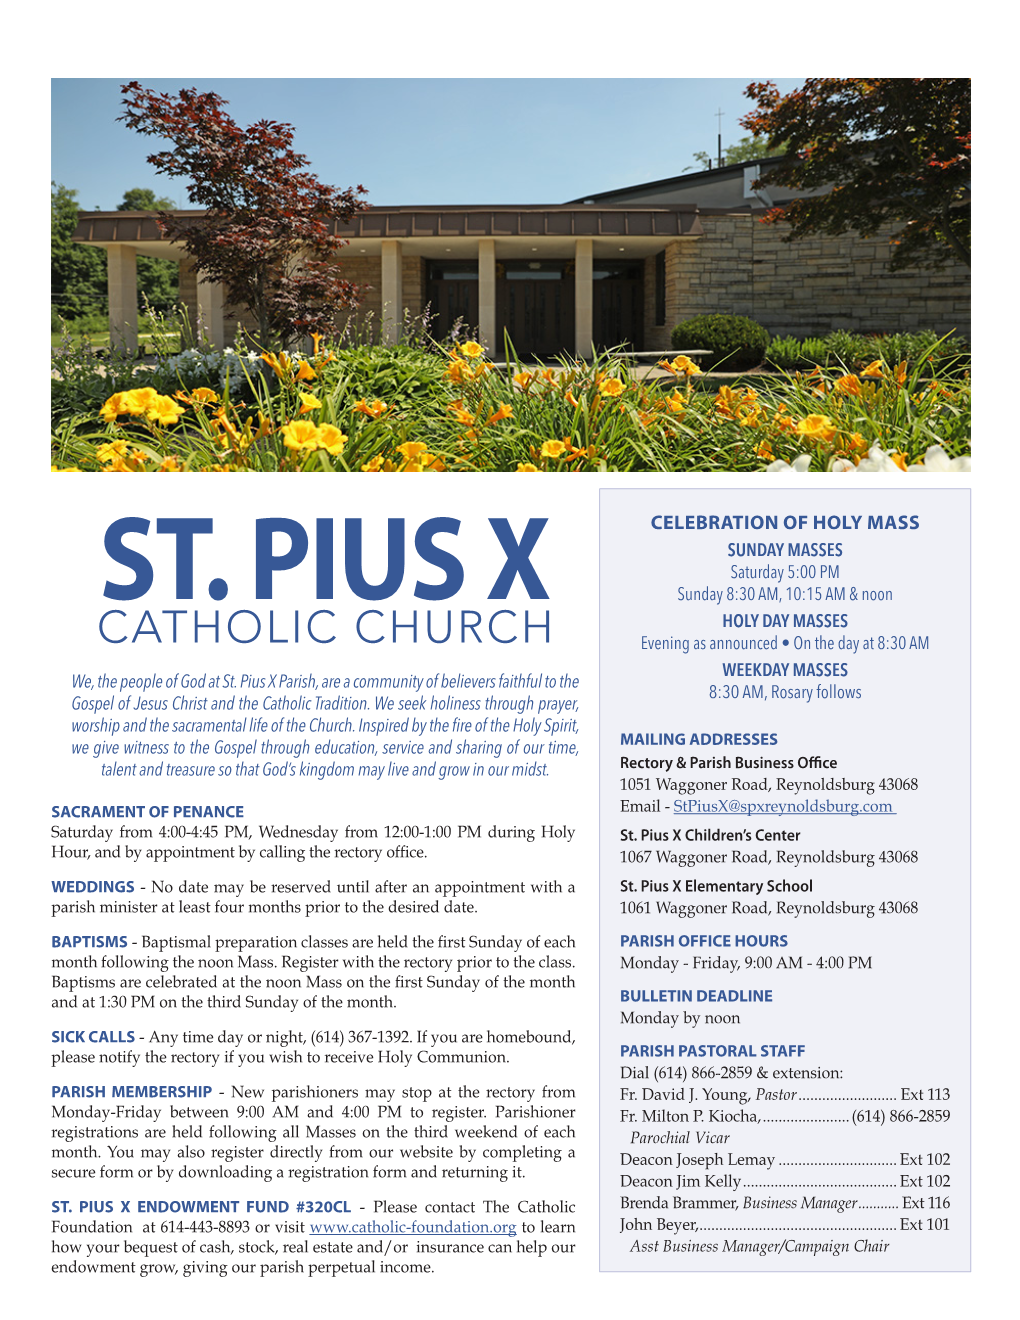 CATHOLIC CHURCH Evening As Announced • on the Day at 8:30 AM